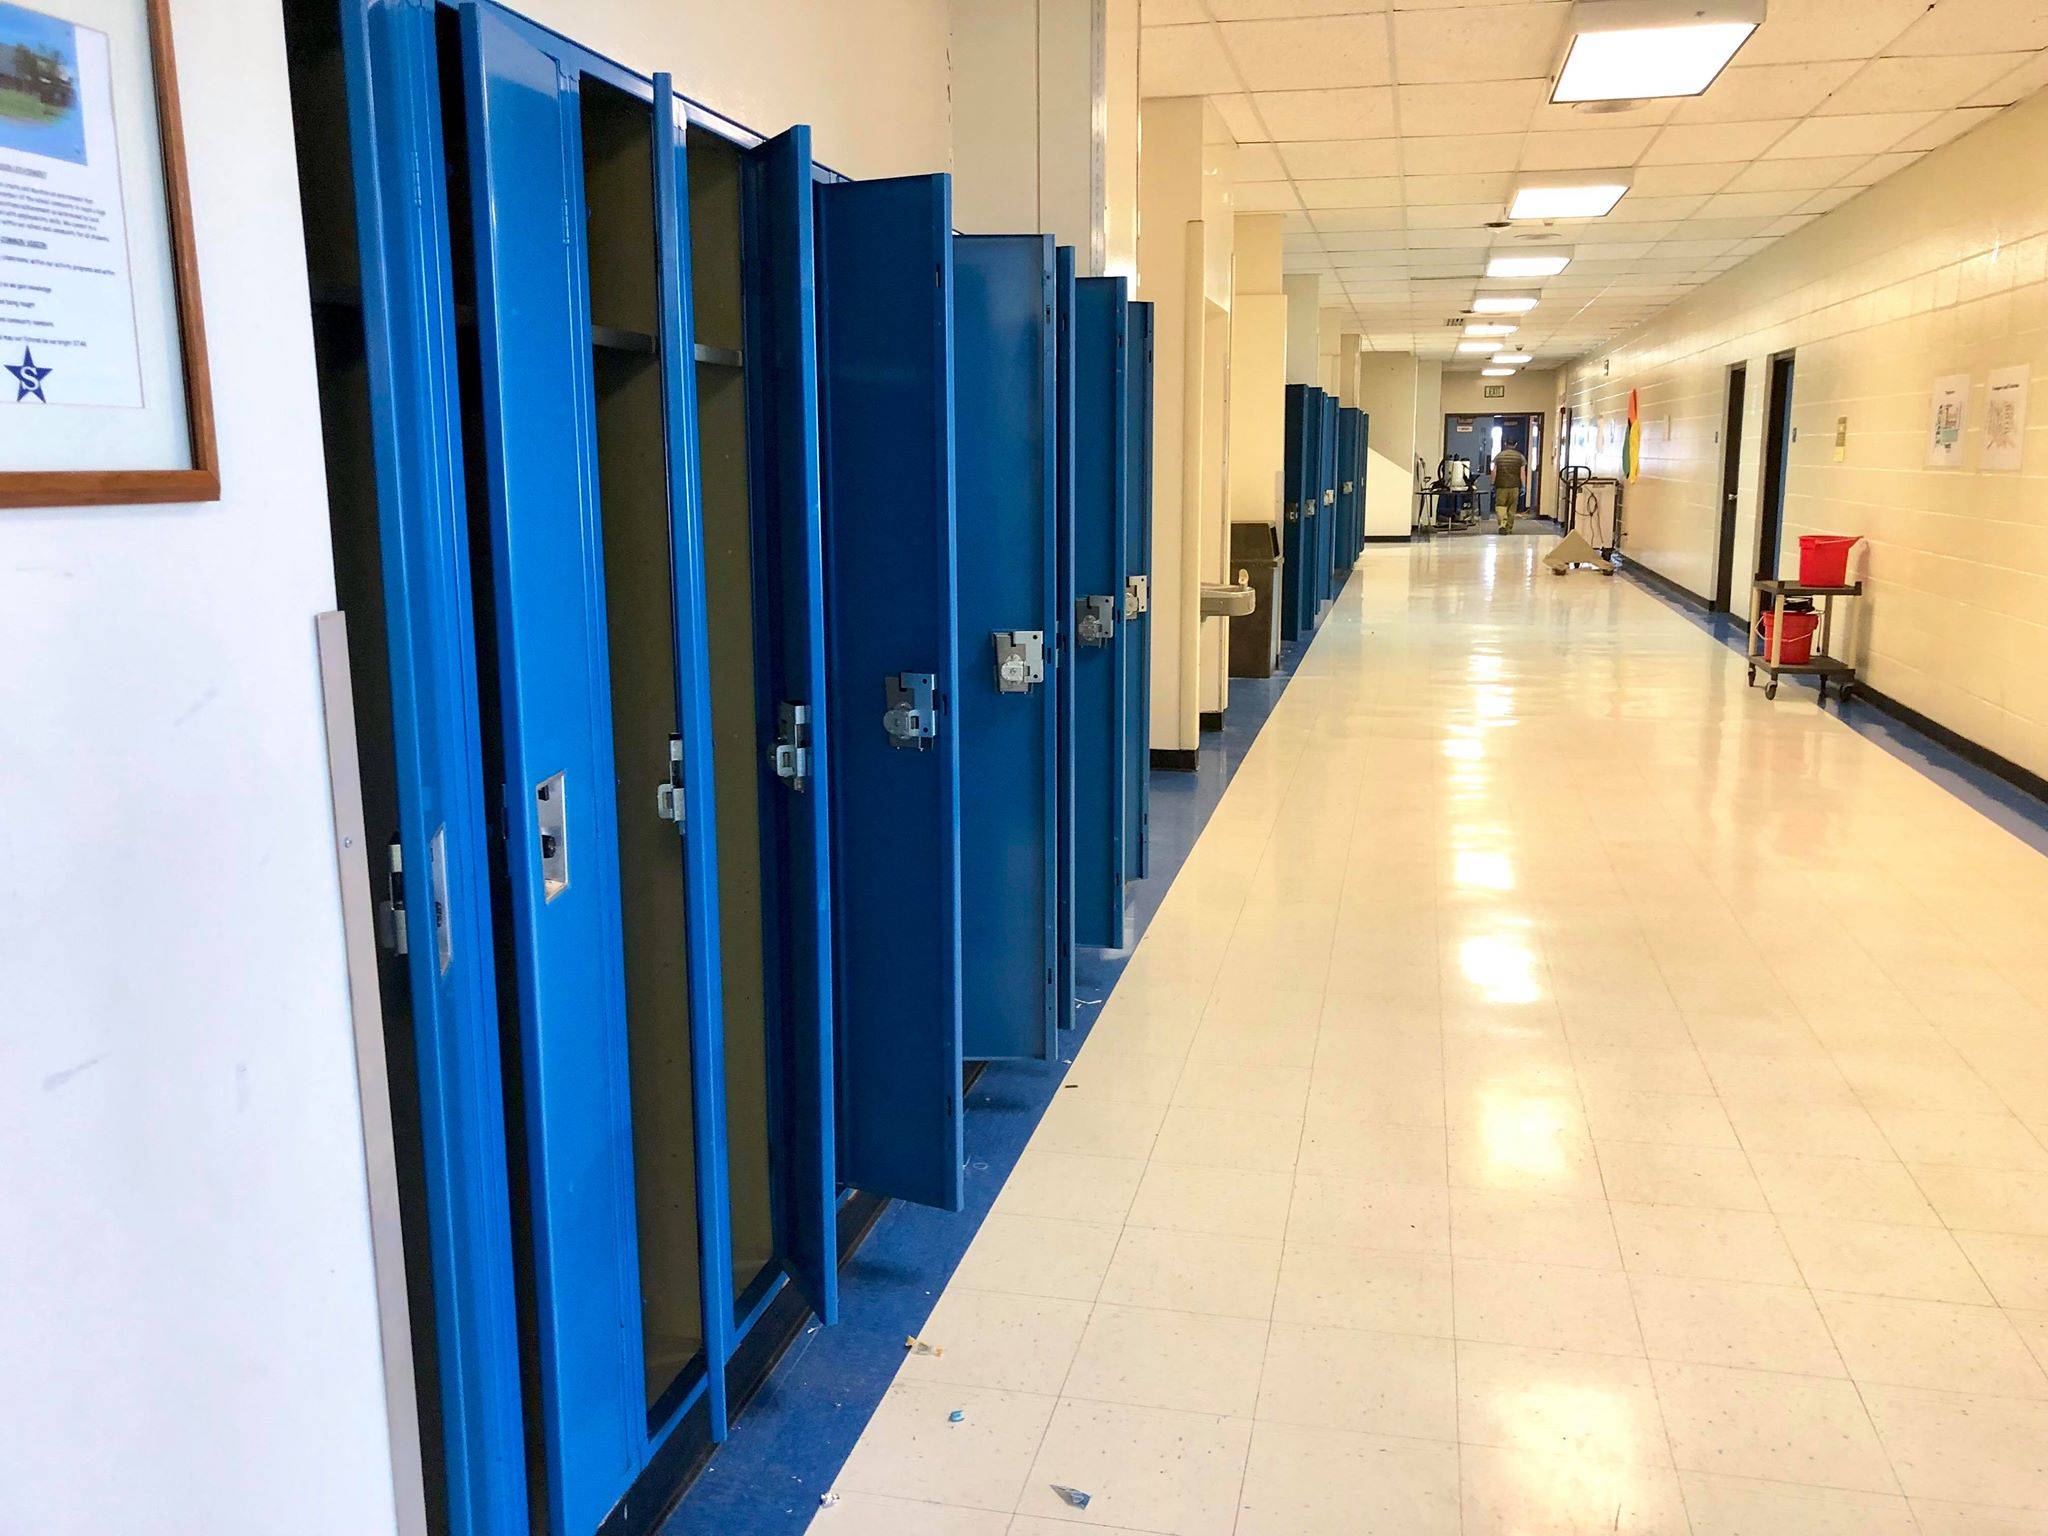 Lockers and hallways remain empty with schools closed across Alaska to slow the spread of COVID-19, the disease caused by the new coronavirus that has prompted a global pandemic, on April 6 in Soldotna . (photo by Victoria Petersen/Peninsula Clarion)